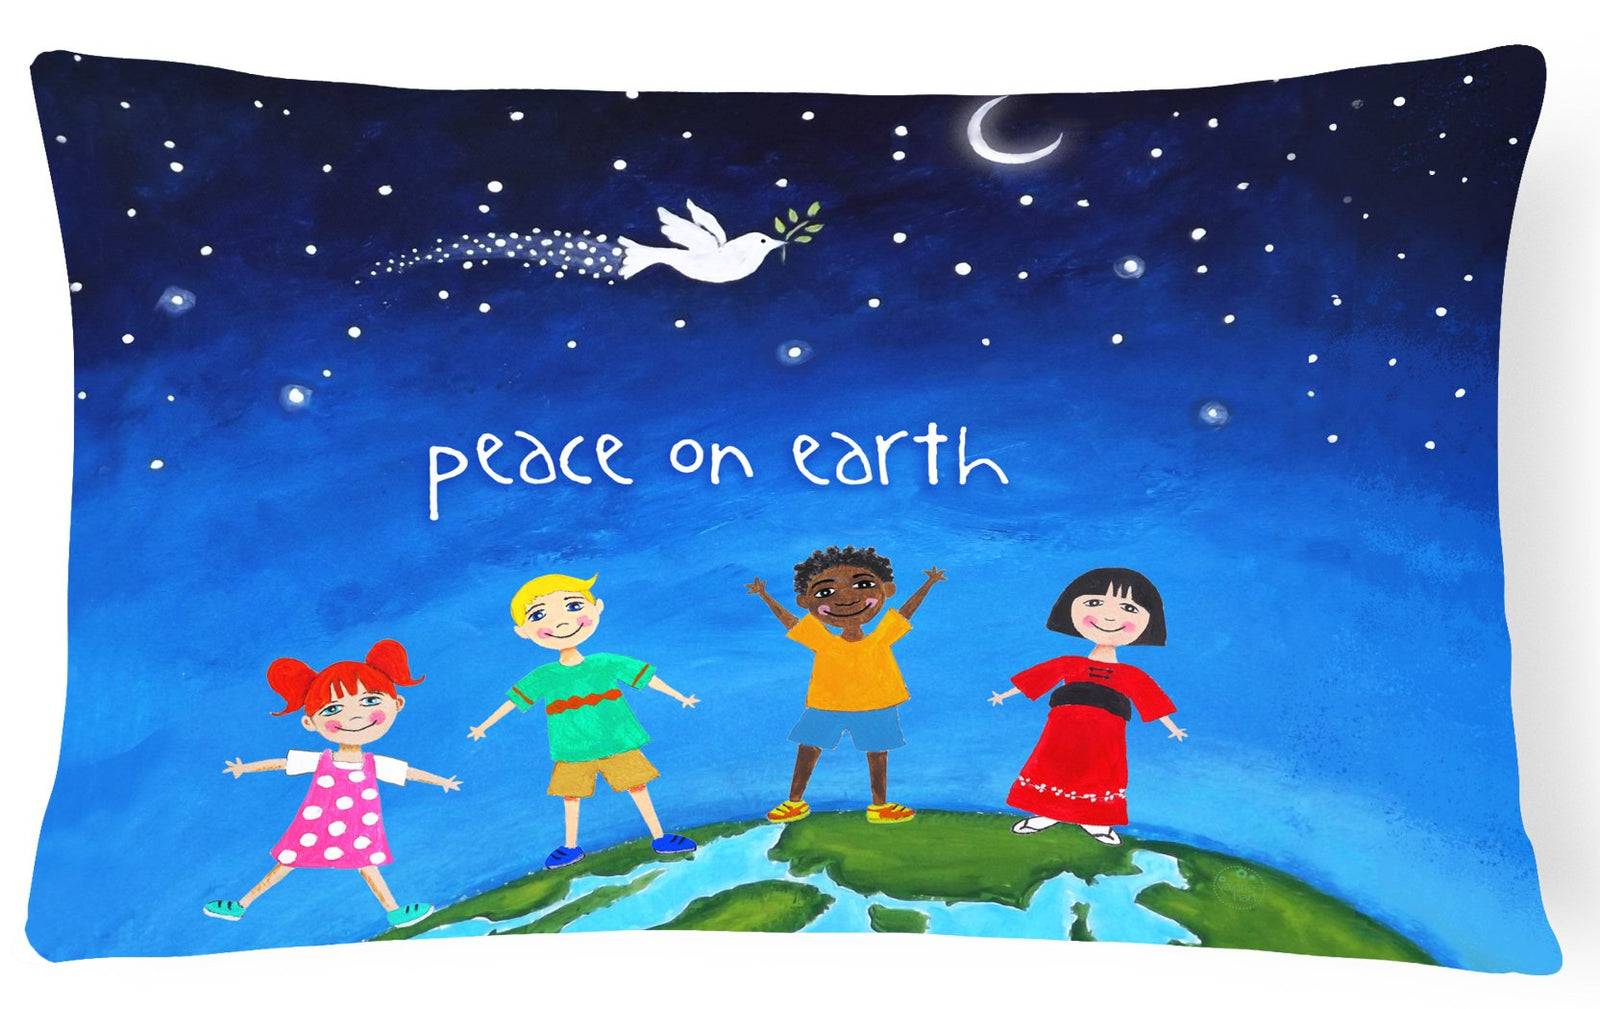 Peace on Earth Canvas Fabric Decorative Pillow VHA3039PW1216 by Caroline's Treasures